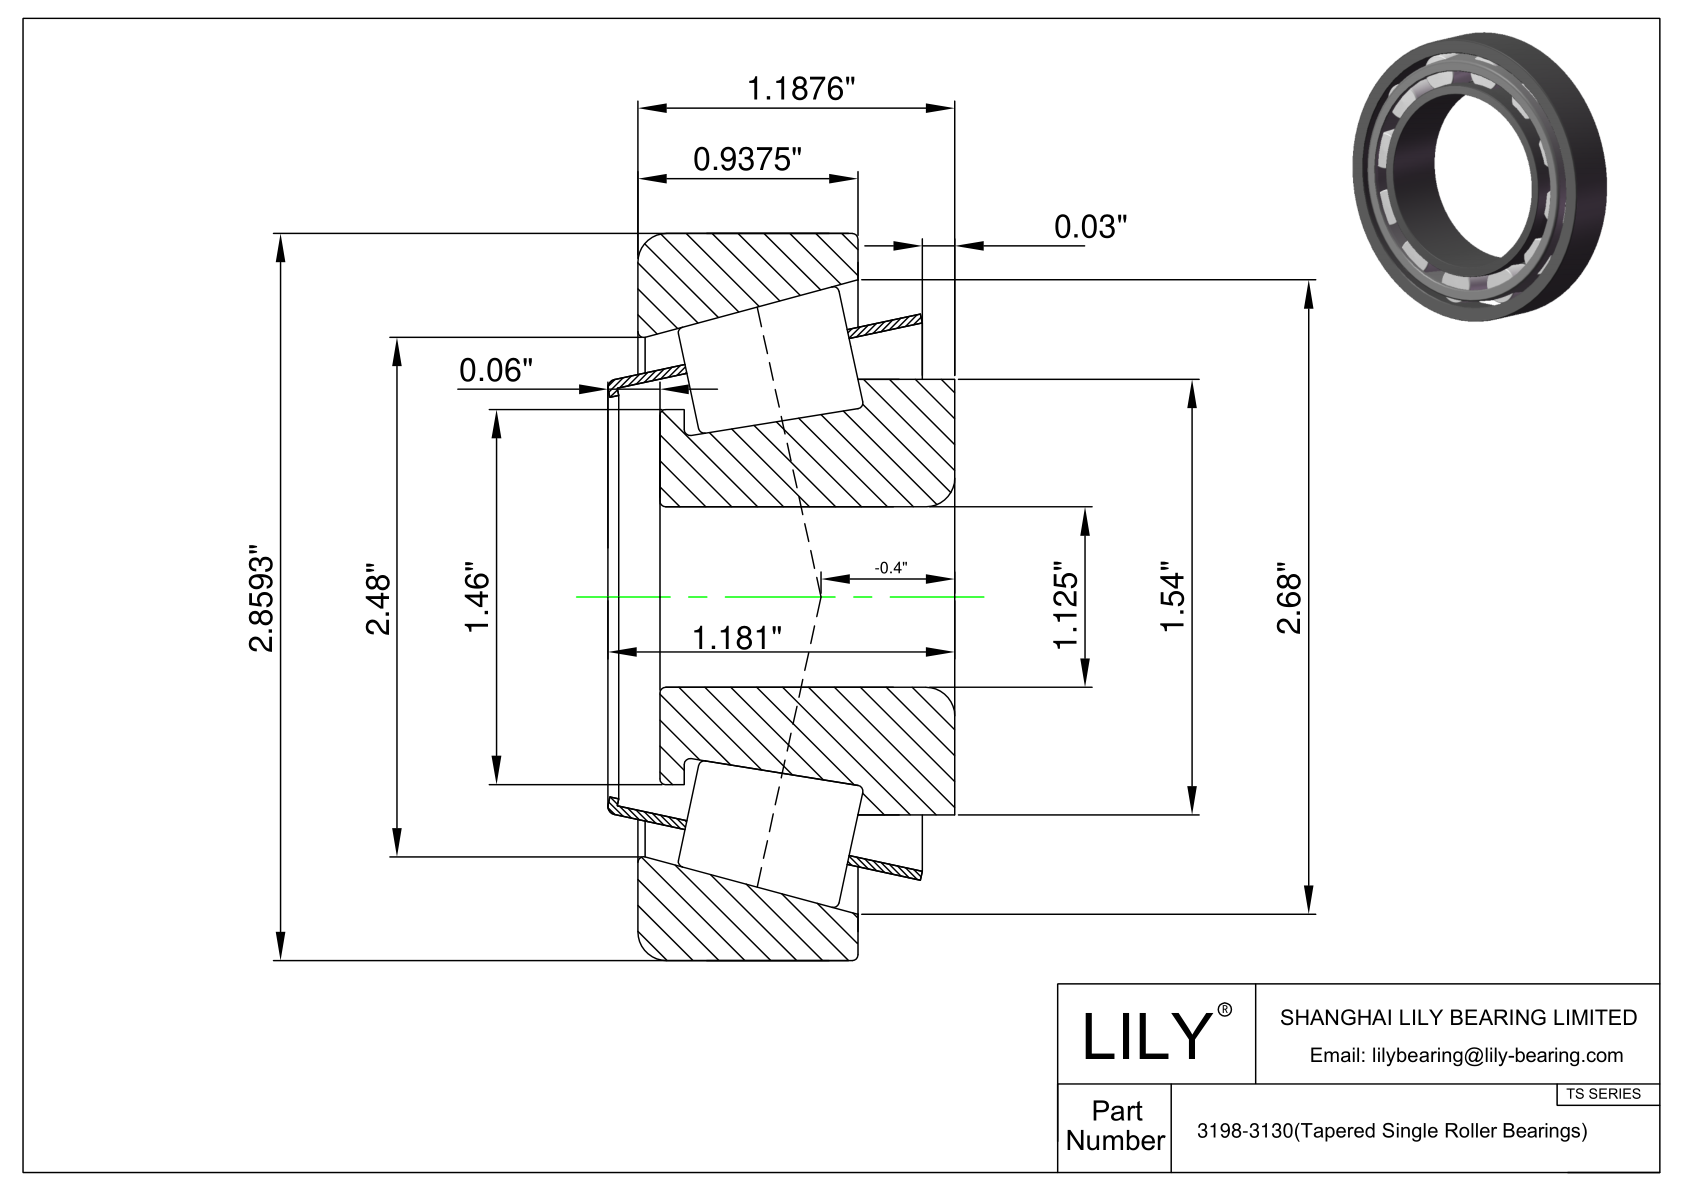 3198-3130 TS (Tapered Single Roller Bearings) (Imperial) cad drawing